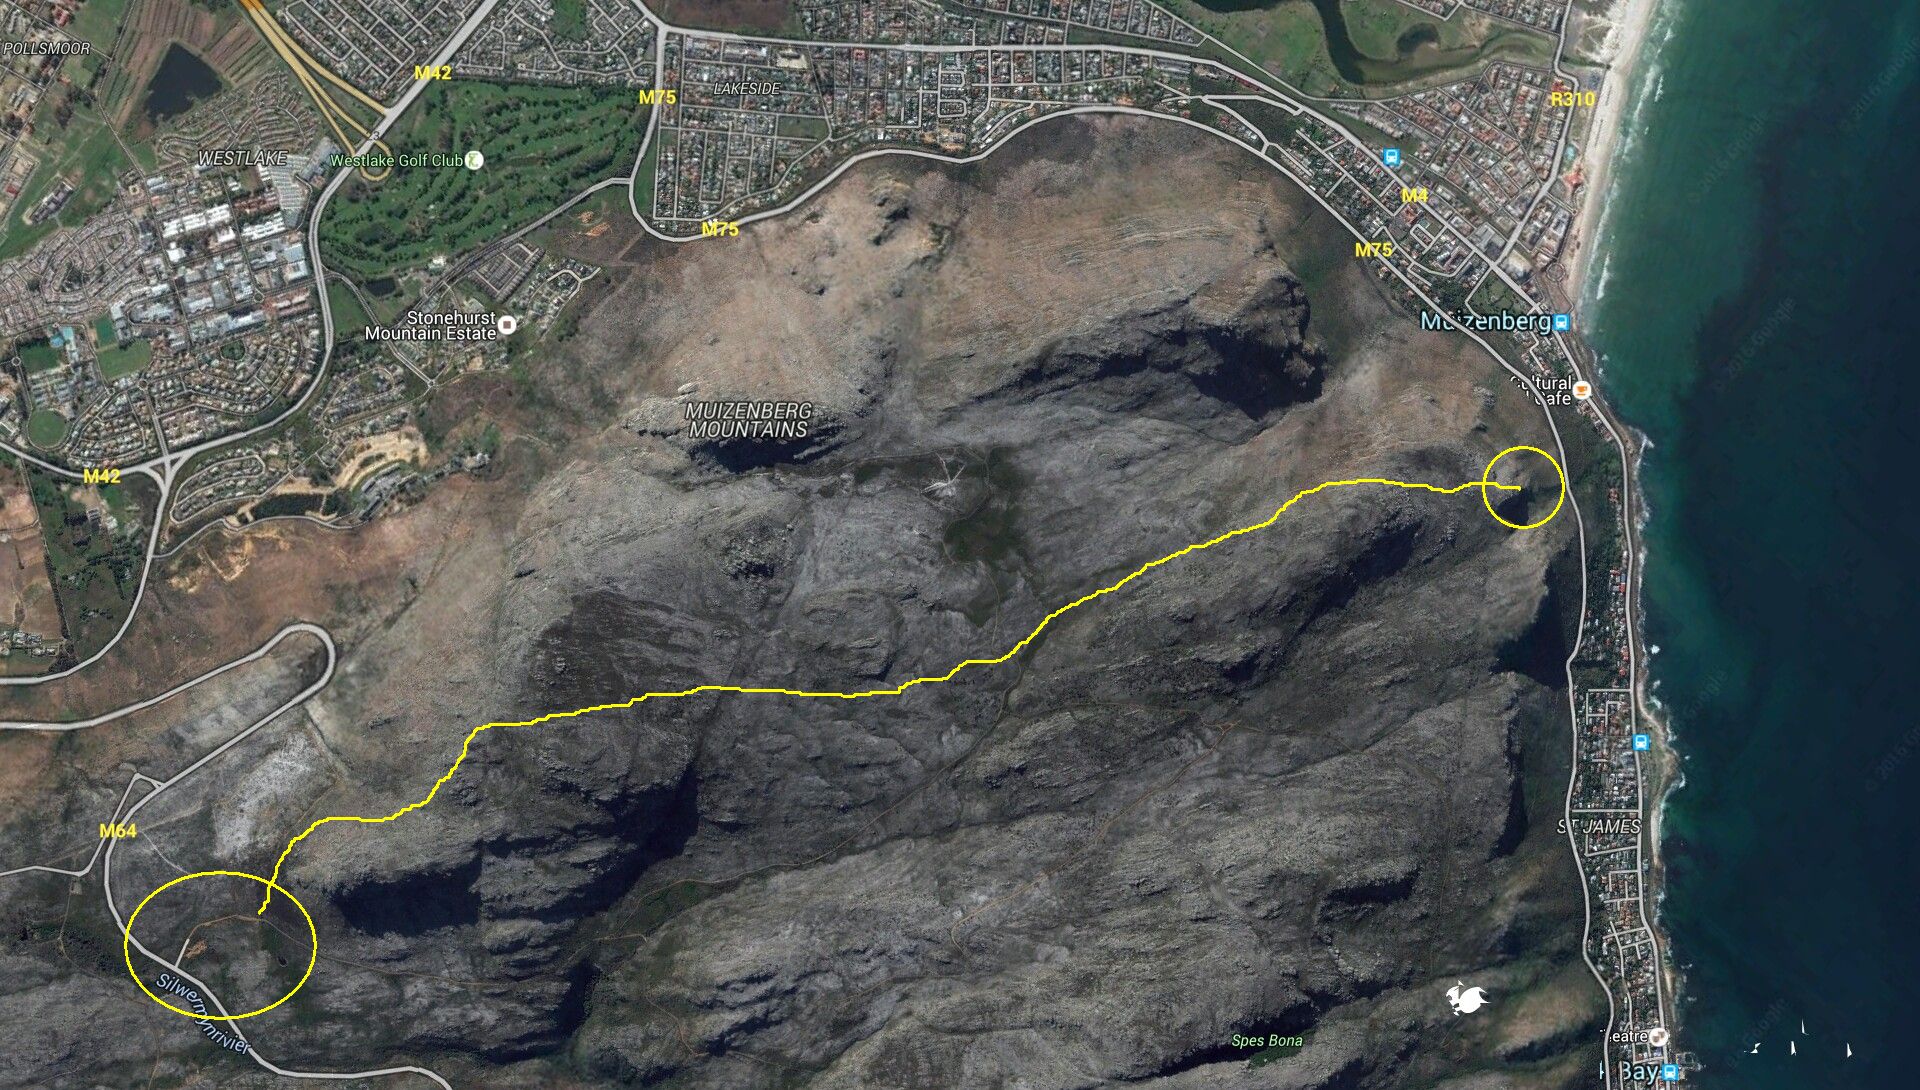 Google earth map of where we walked